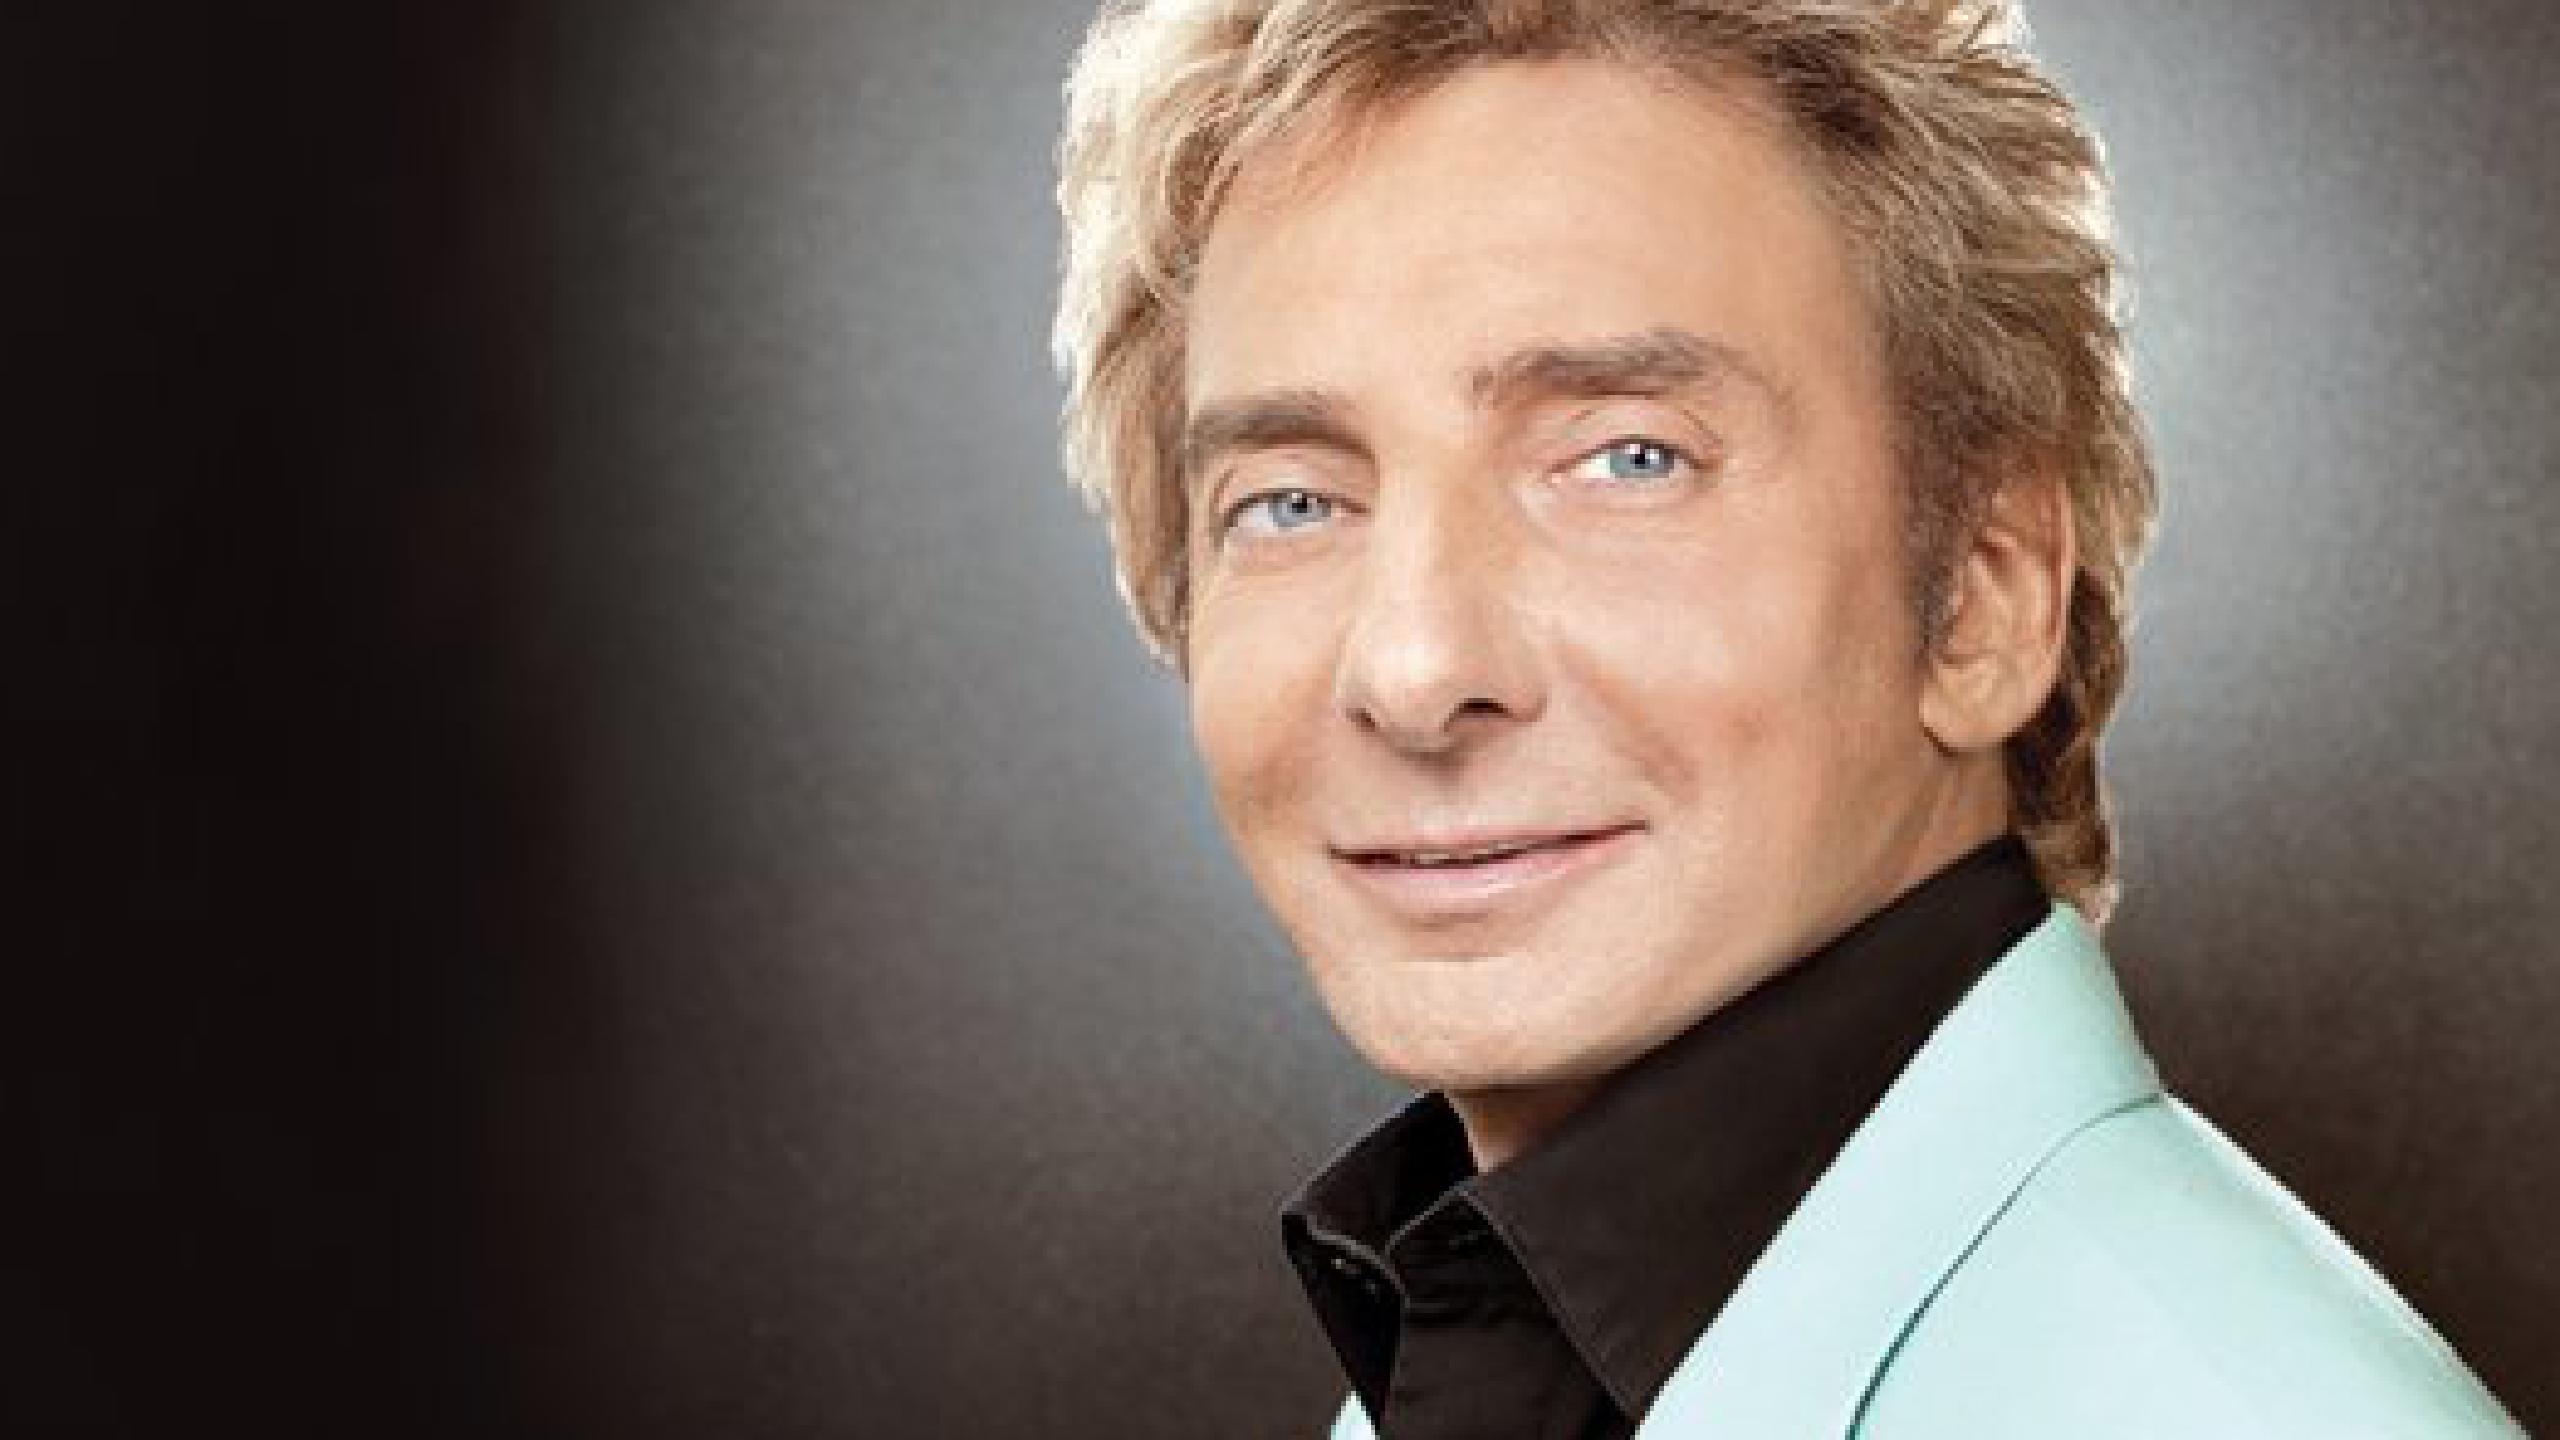 Barry Manilow tour dates 2019 2020. Barry Manilow tickets